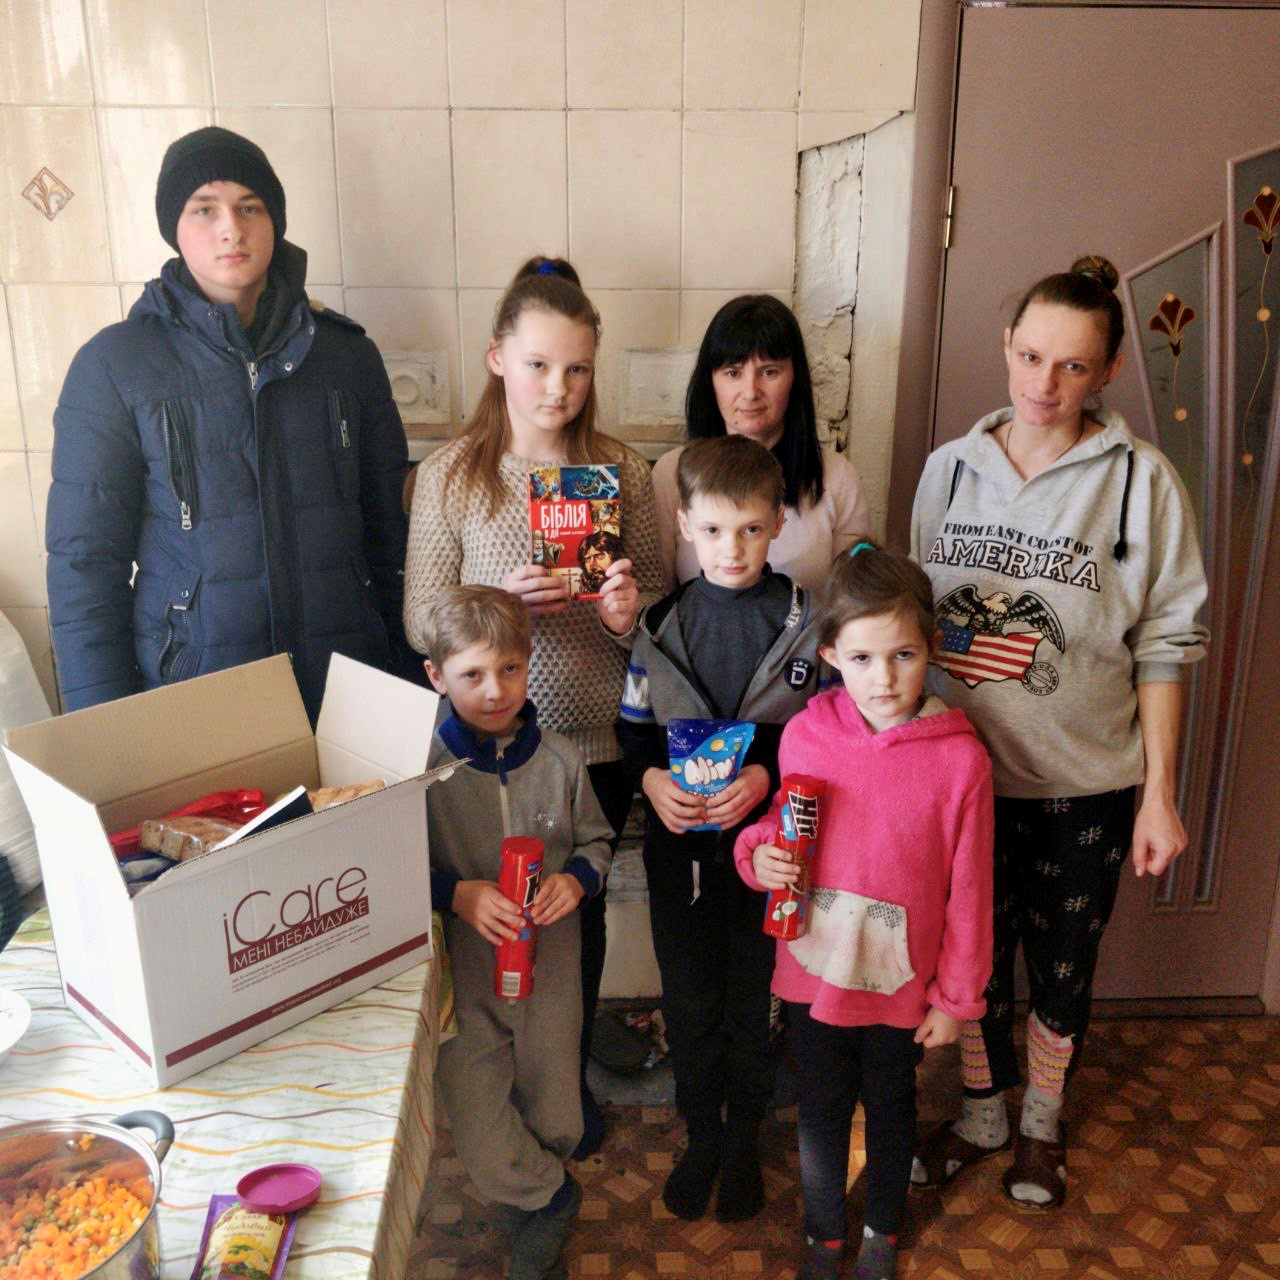 Families have been asking for Bibles and Children’s Bibles in Ukrainian. Mission Eurasia is providing these as part of their food packages.